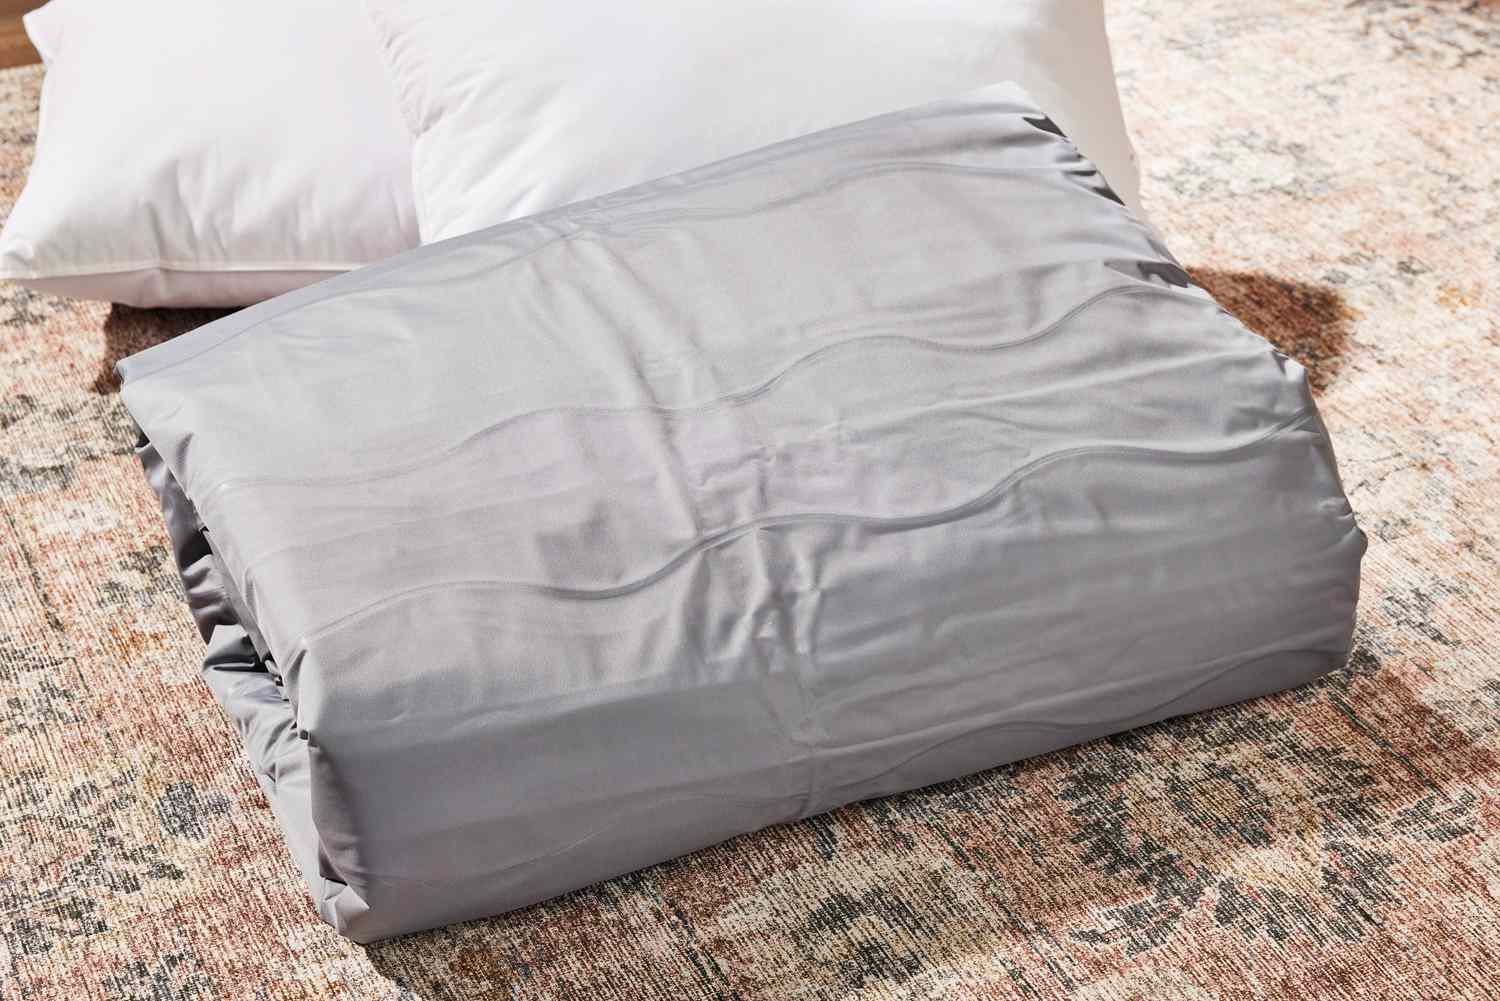 The Brookstone Perfect Queen Air Mattress with Built-in Pump folded up